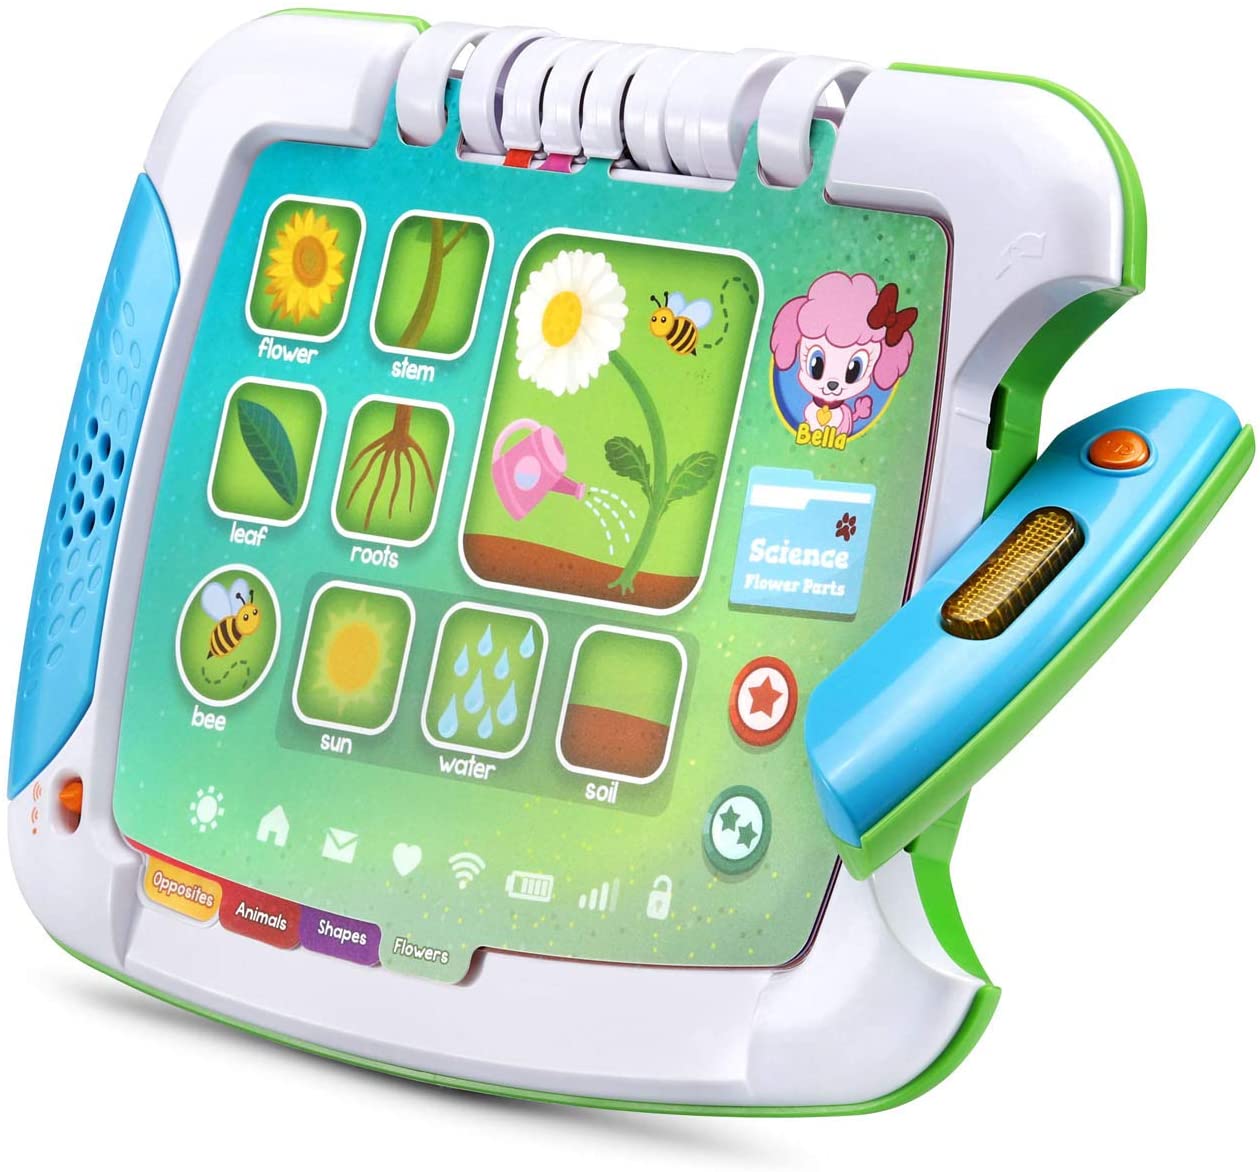 LeapFrog 2-in-1 Touch and Learn Tablet